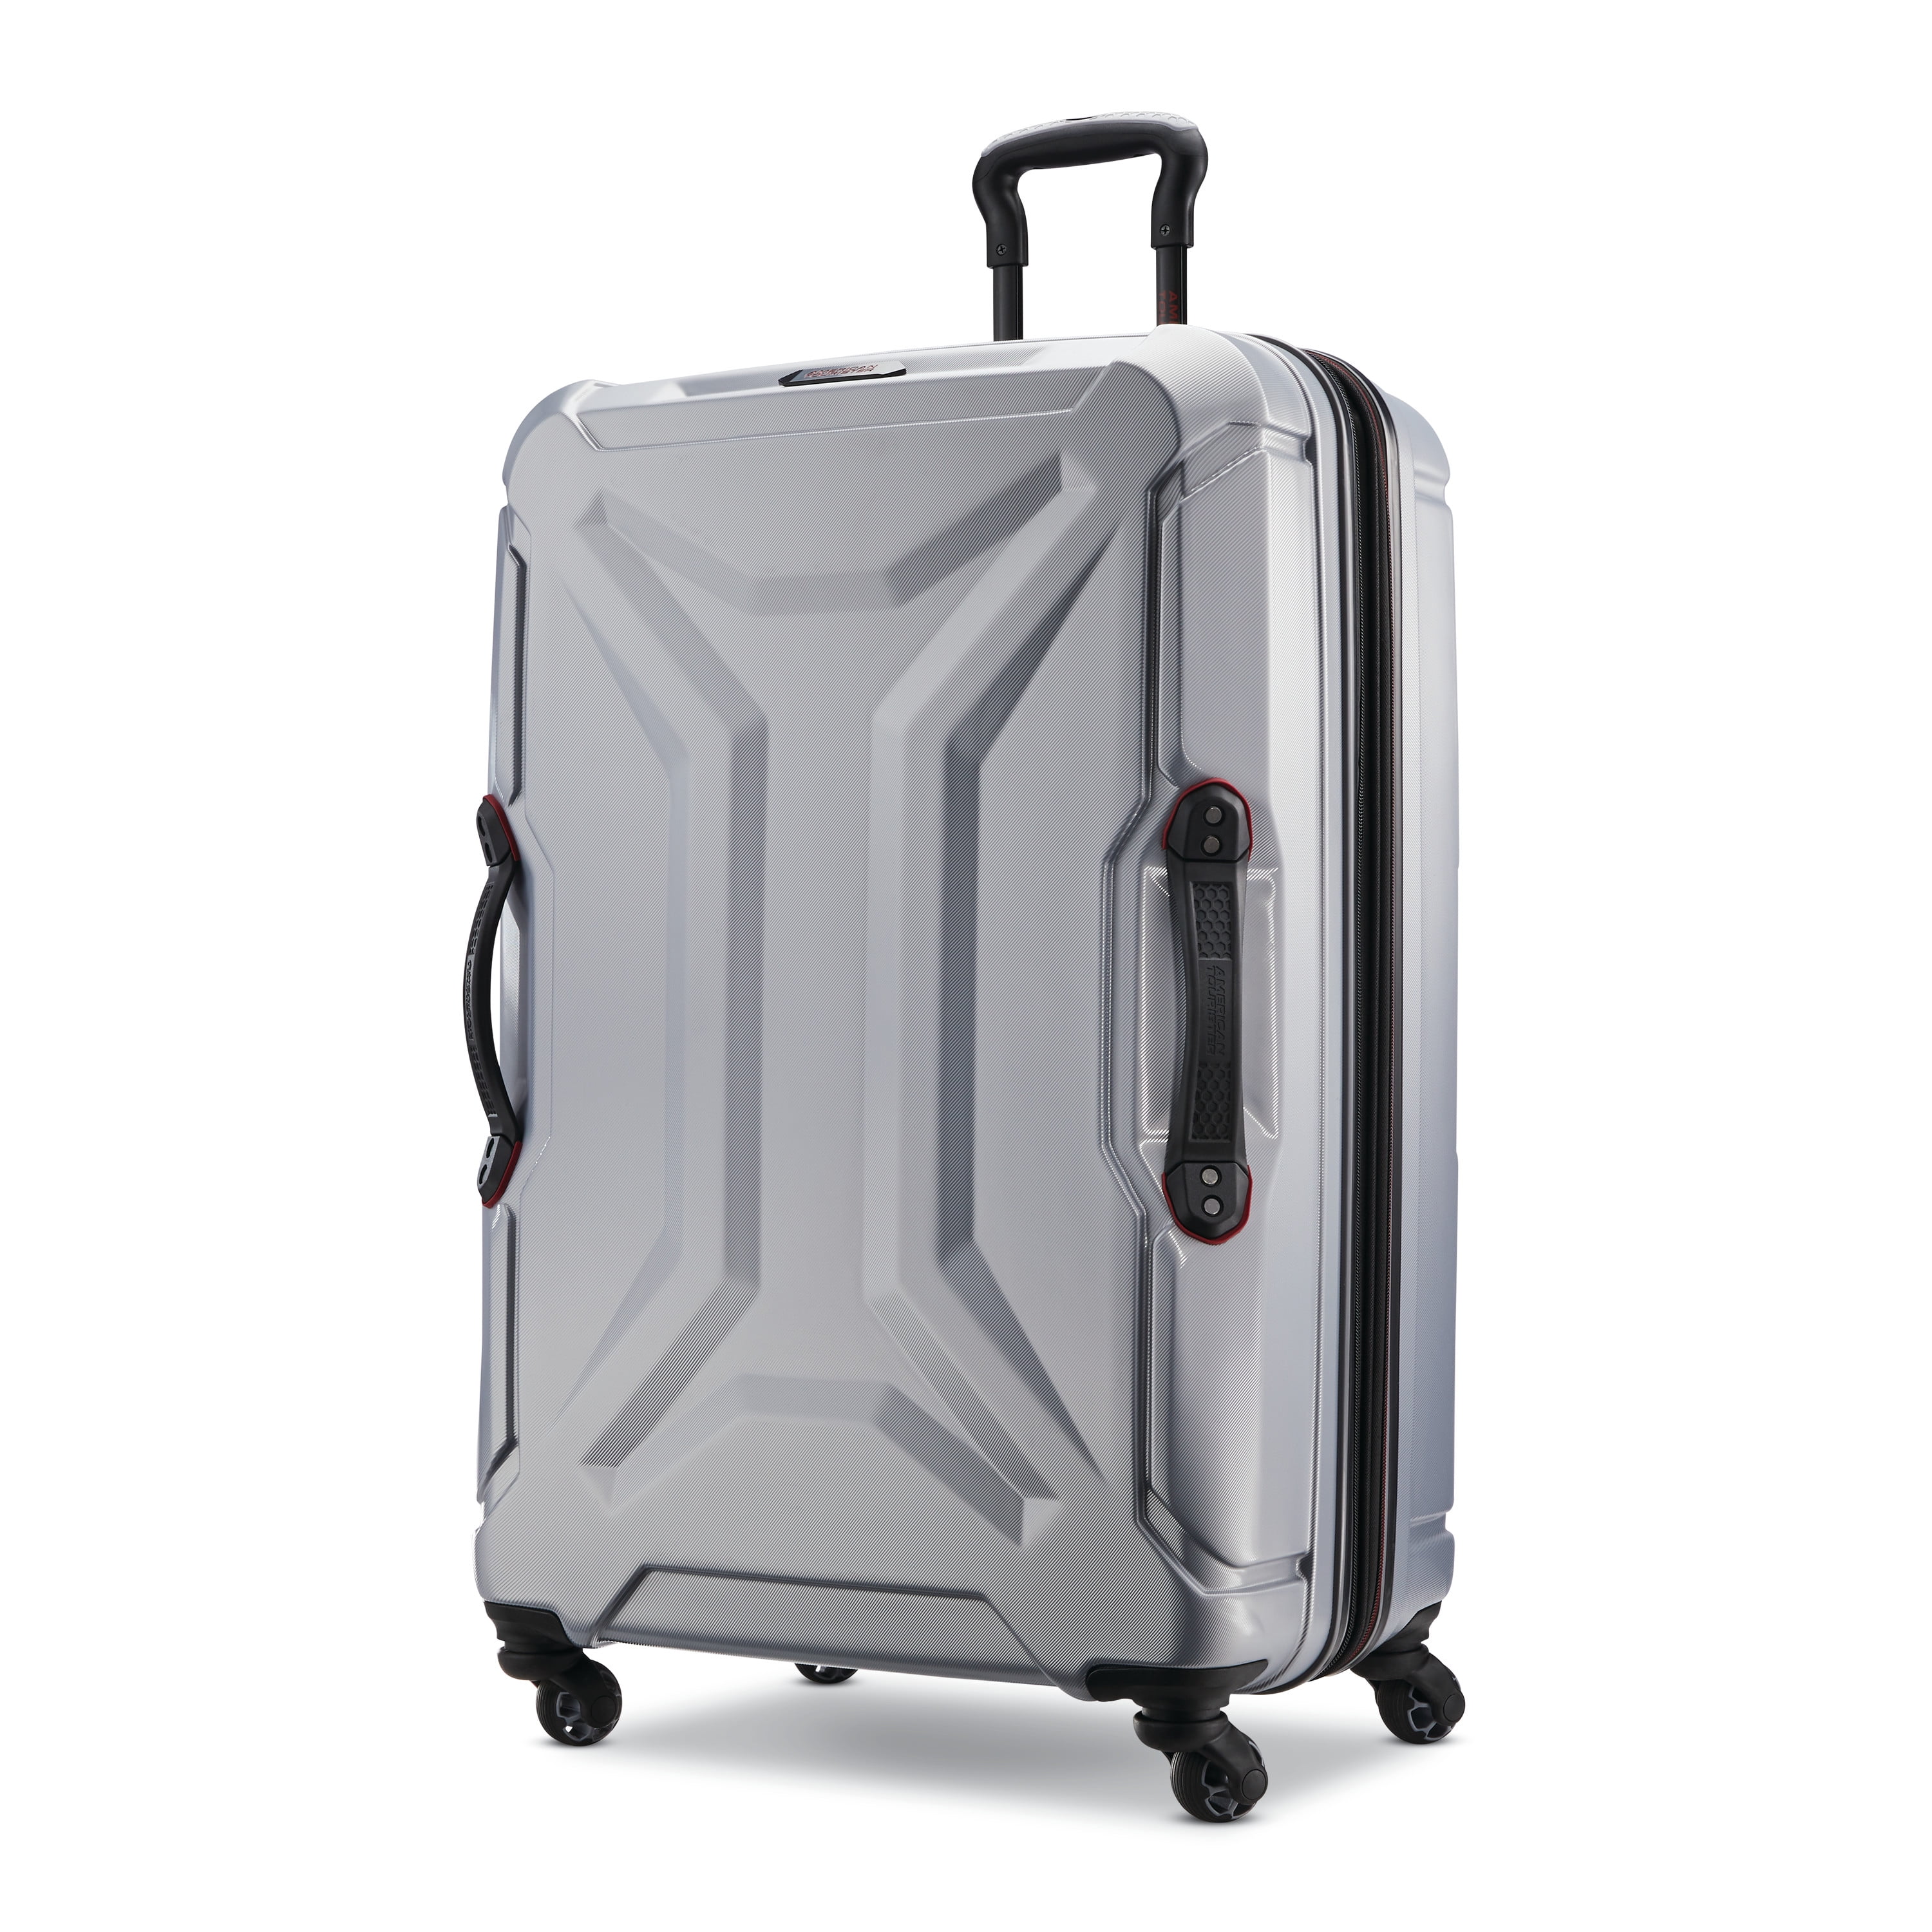 American Tourister Cargo Max 28" Hardside Spinner Luggage, -